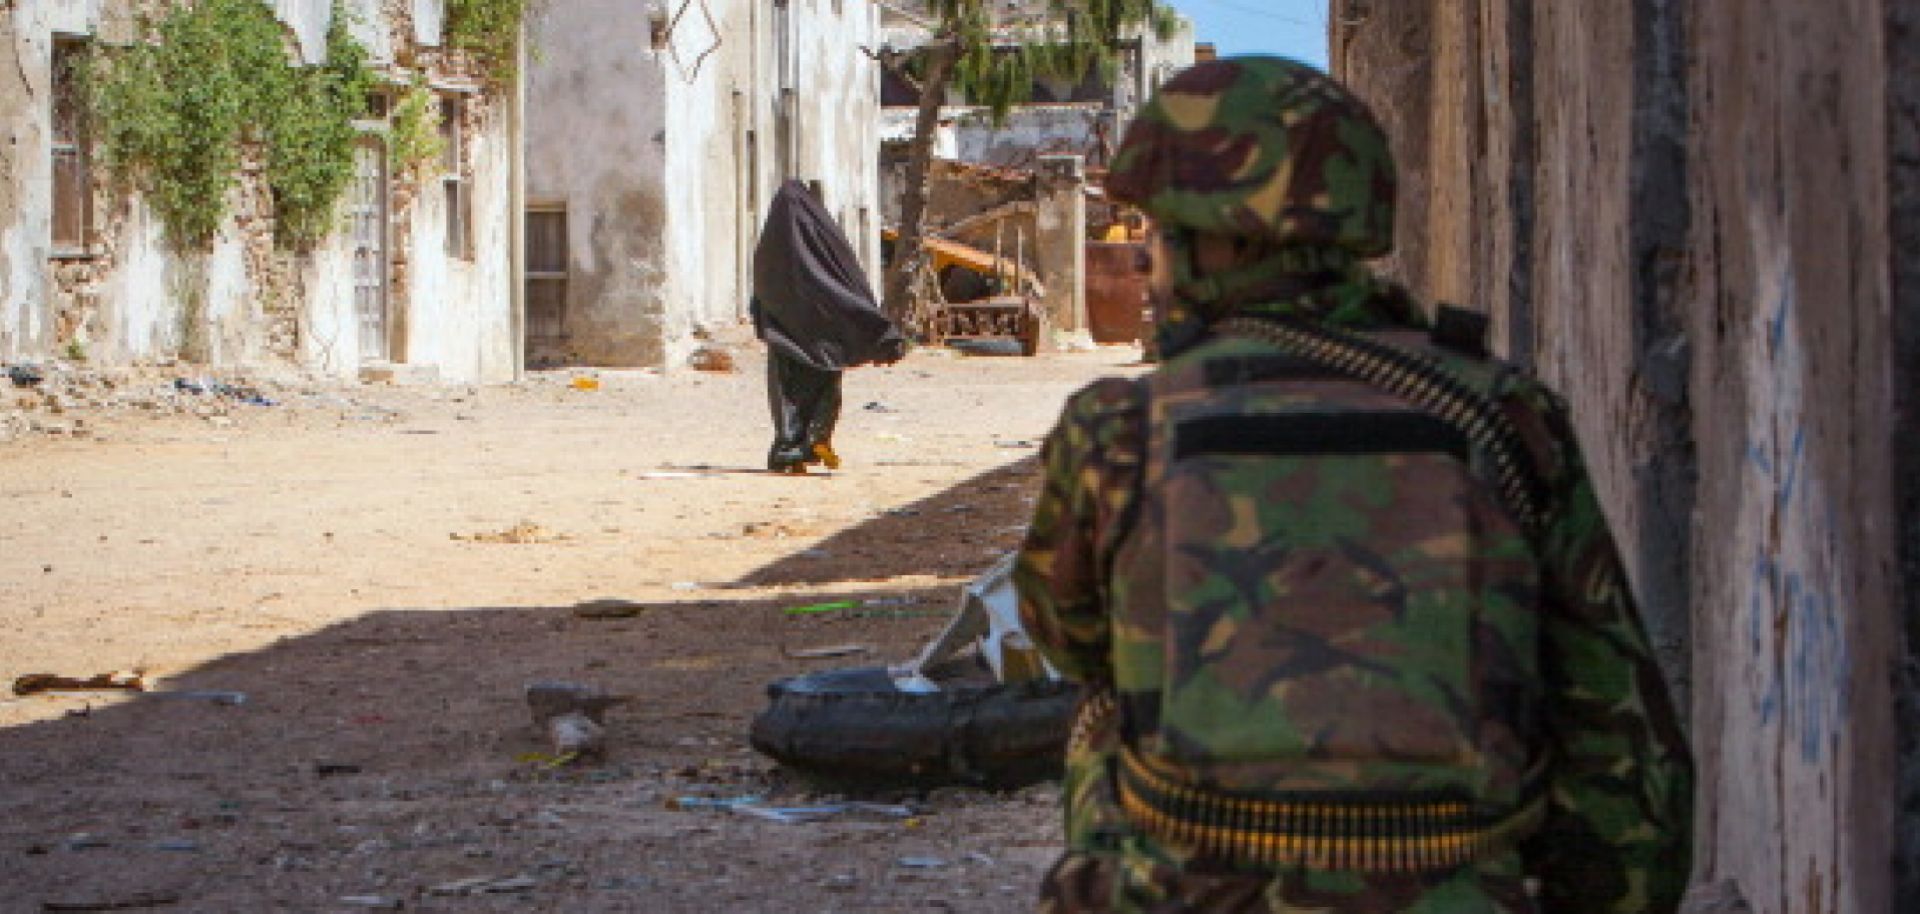 A soldier of the Kenyan Contingent serving with the African Union Mission in Somalia (AMISOM) keeps watch on a street in the center of the southern Somali port city of Kismayo on October 5, 2012. Meanwhile, a combat engineering team inspects the surrounding area following reports of a suspected improvised explosive device (IED) left behind by the Al-Qaeda-affiliated extremist group Al Shabaab. 